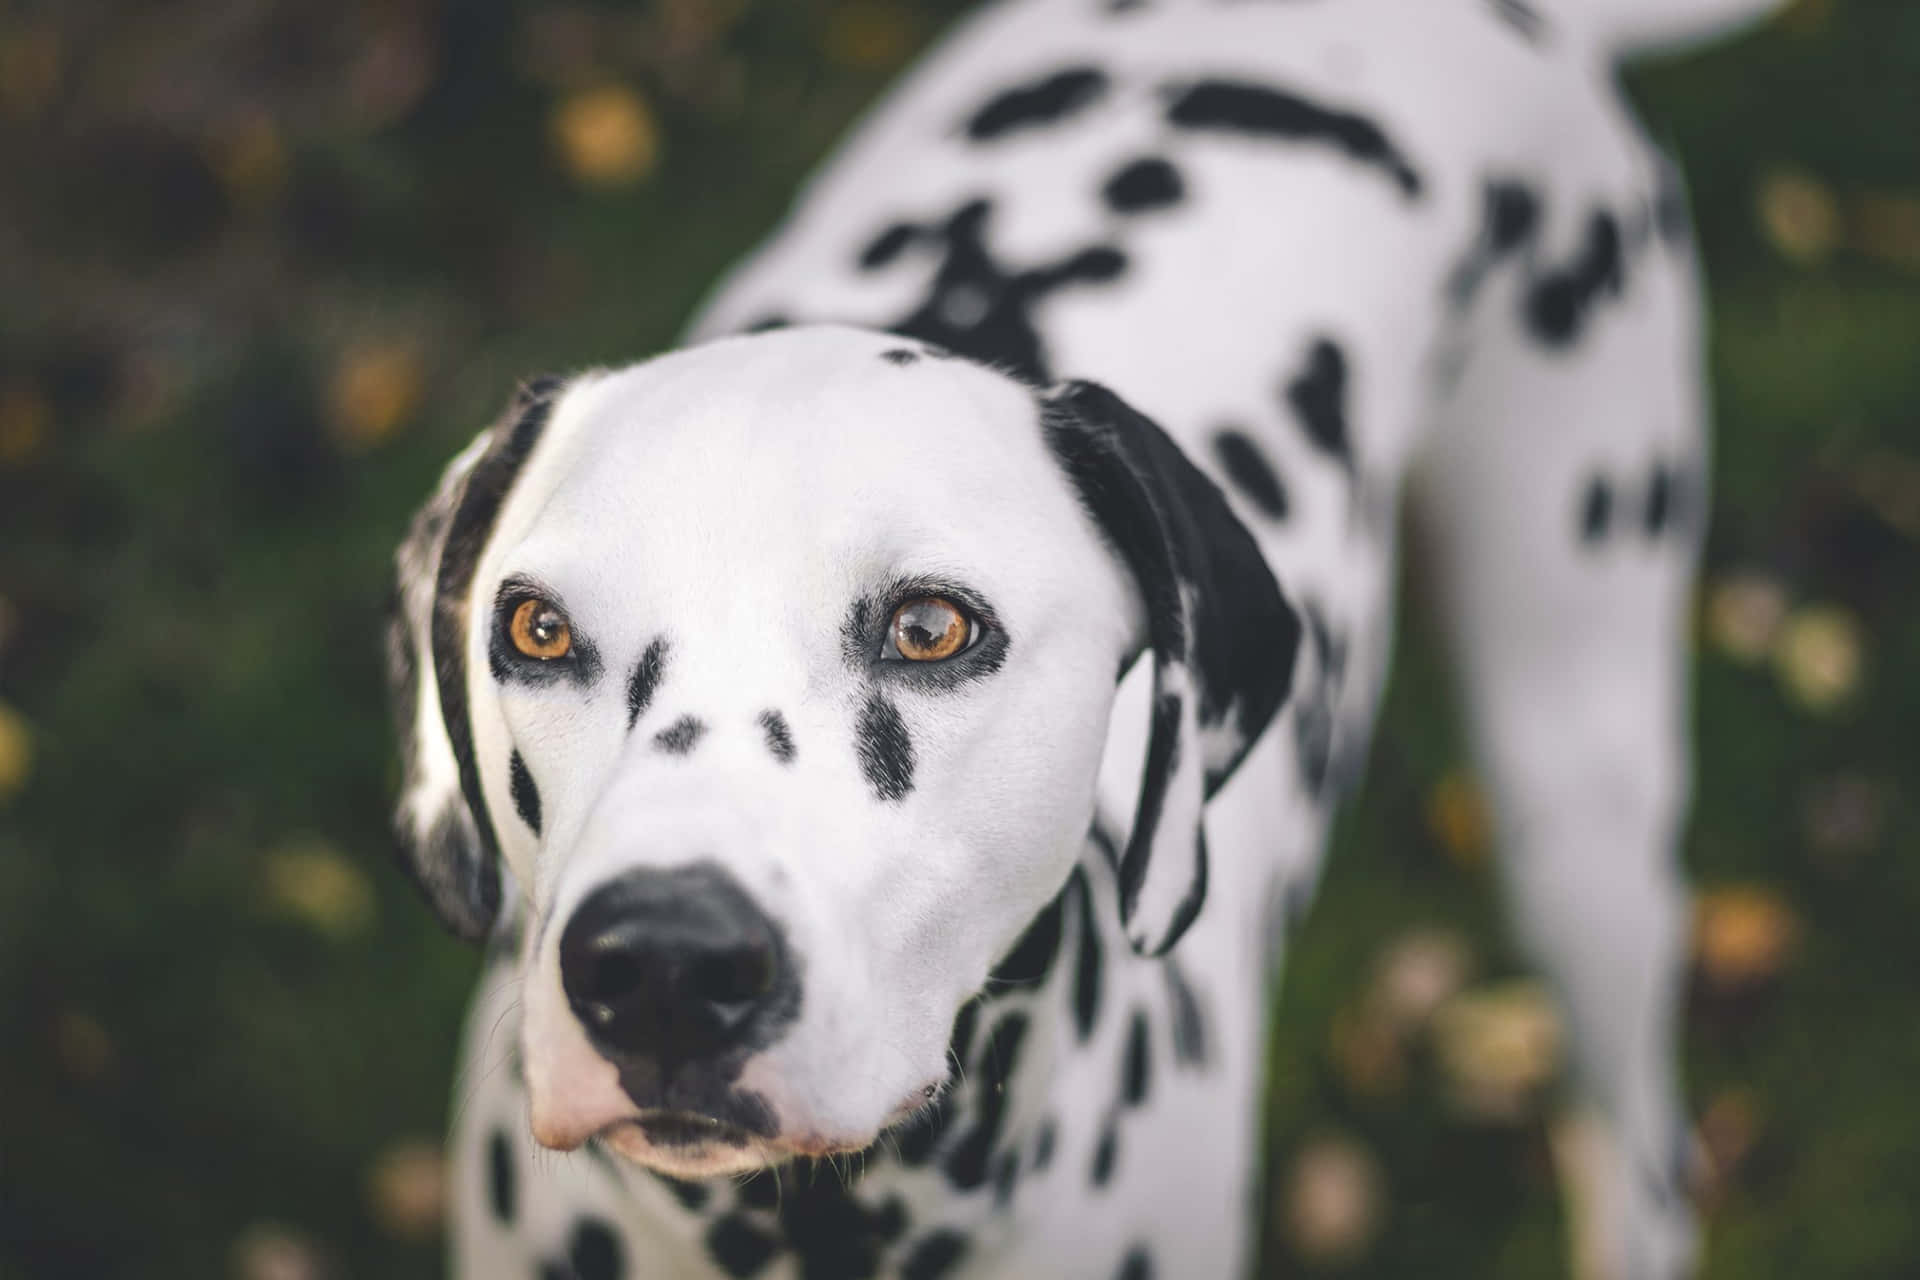 A Dalmatian puppy enjoying a sunny day in the park.